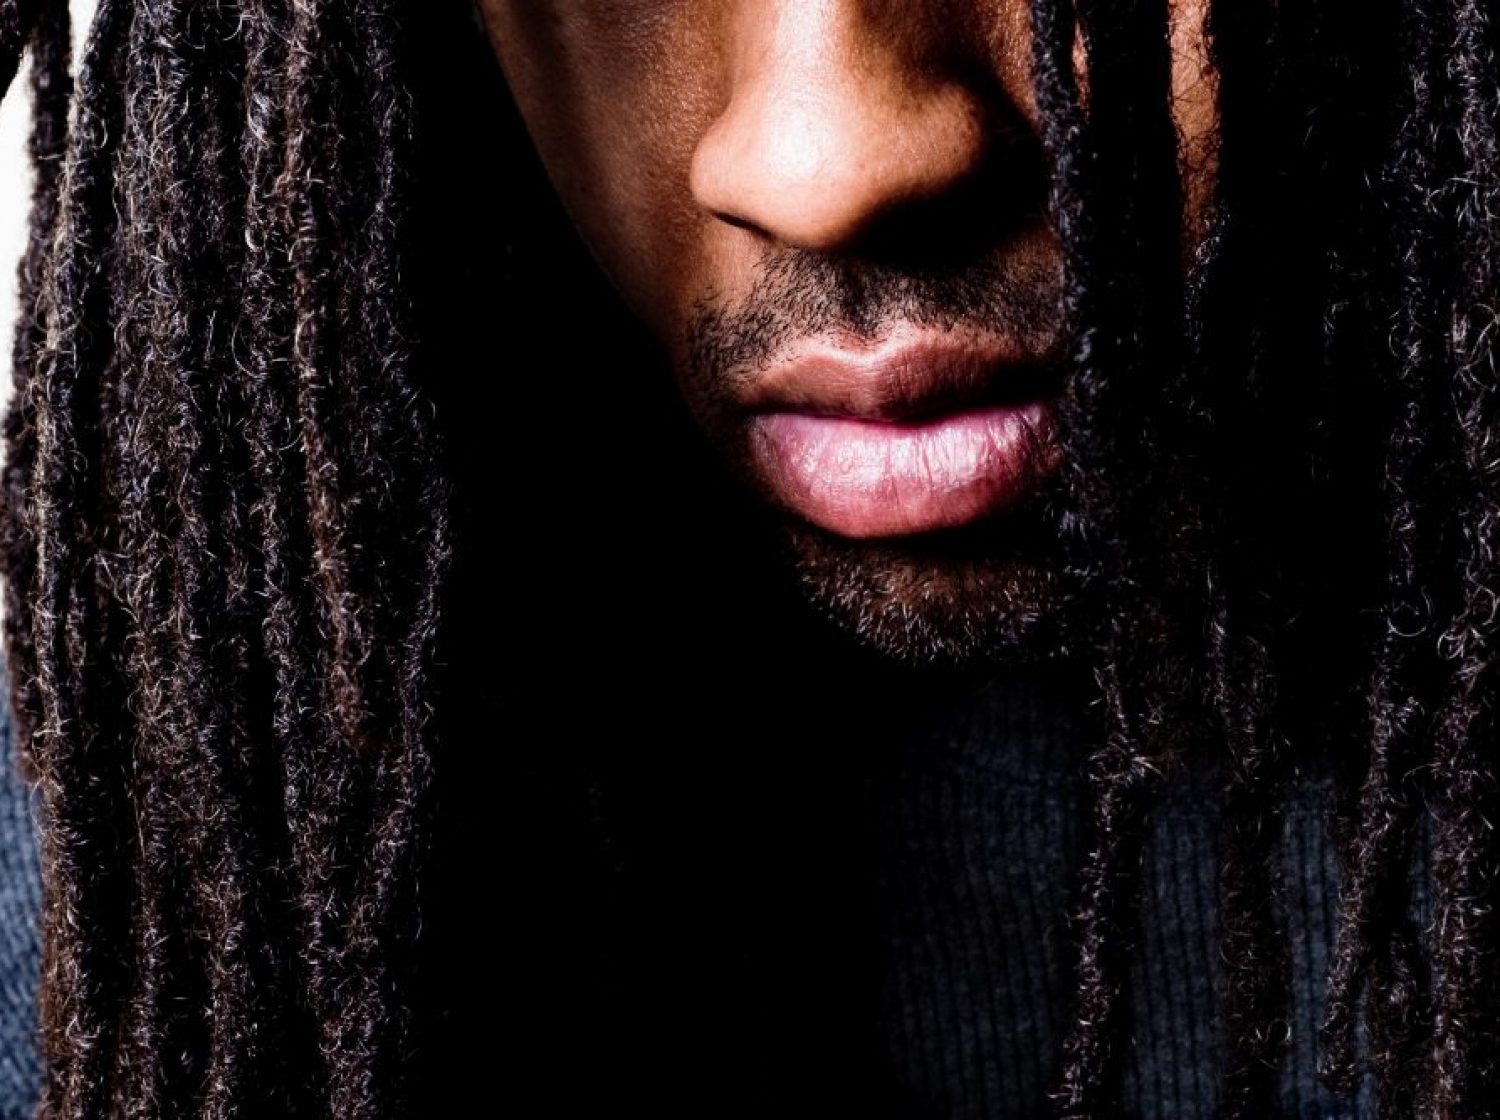 27 Pictures Showing That Black Men With Locs Are Not Looking Good 